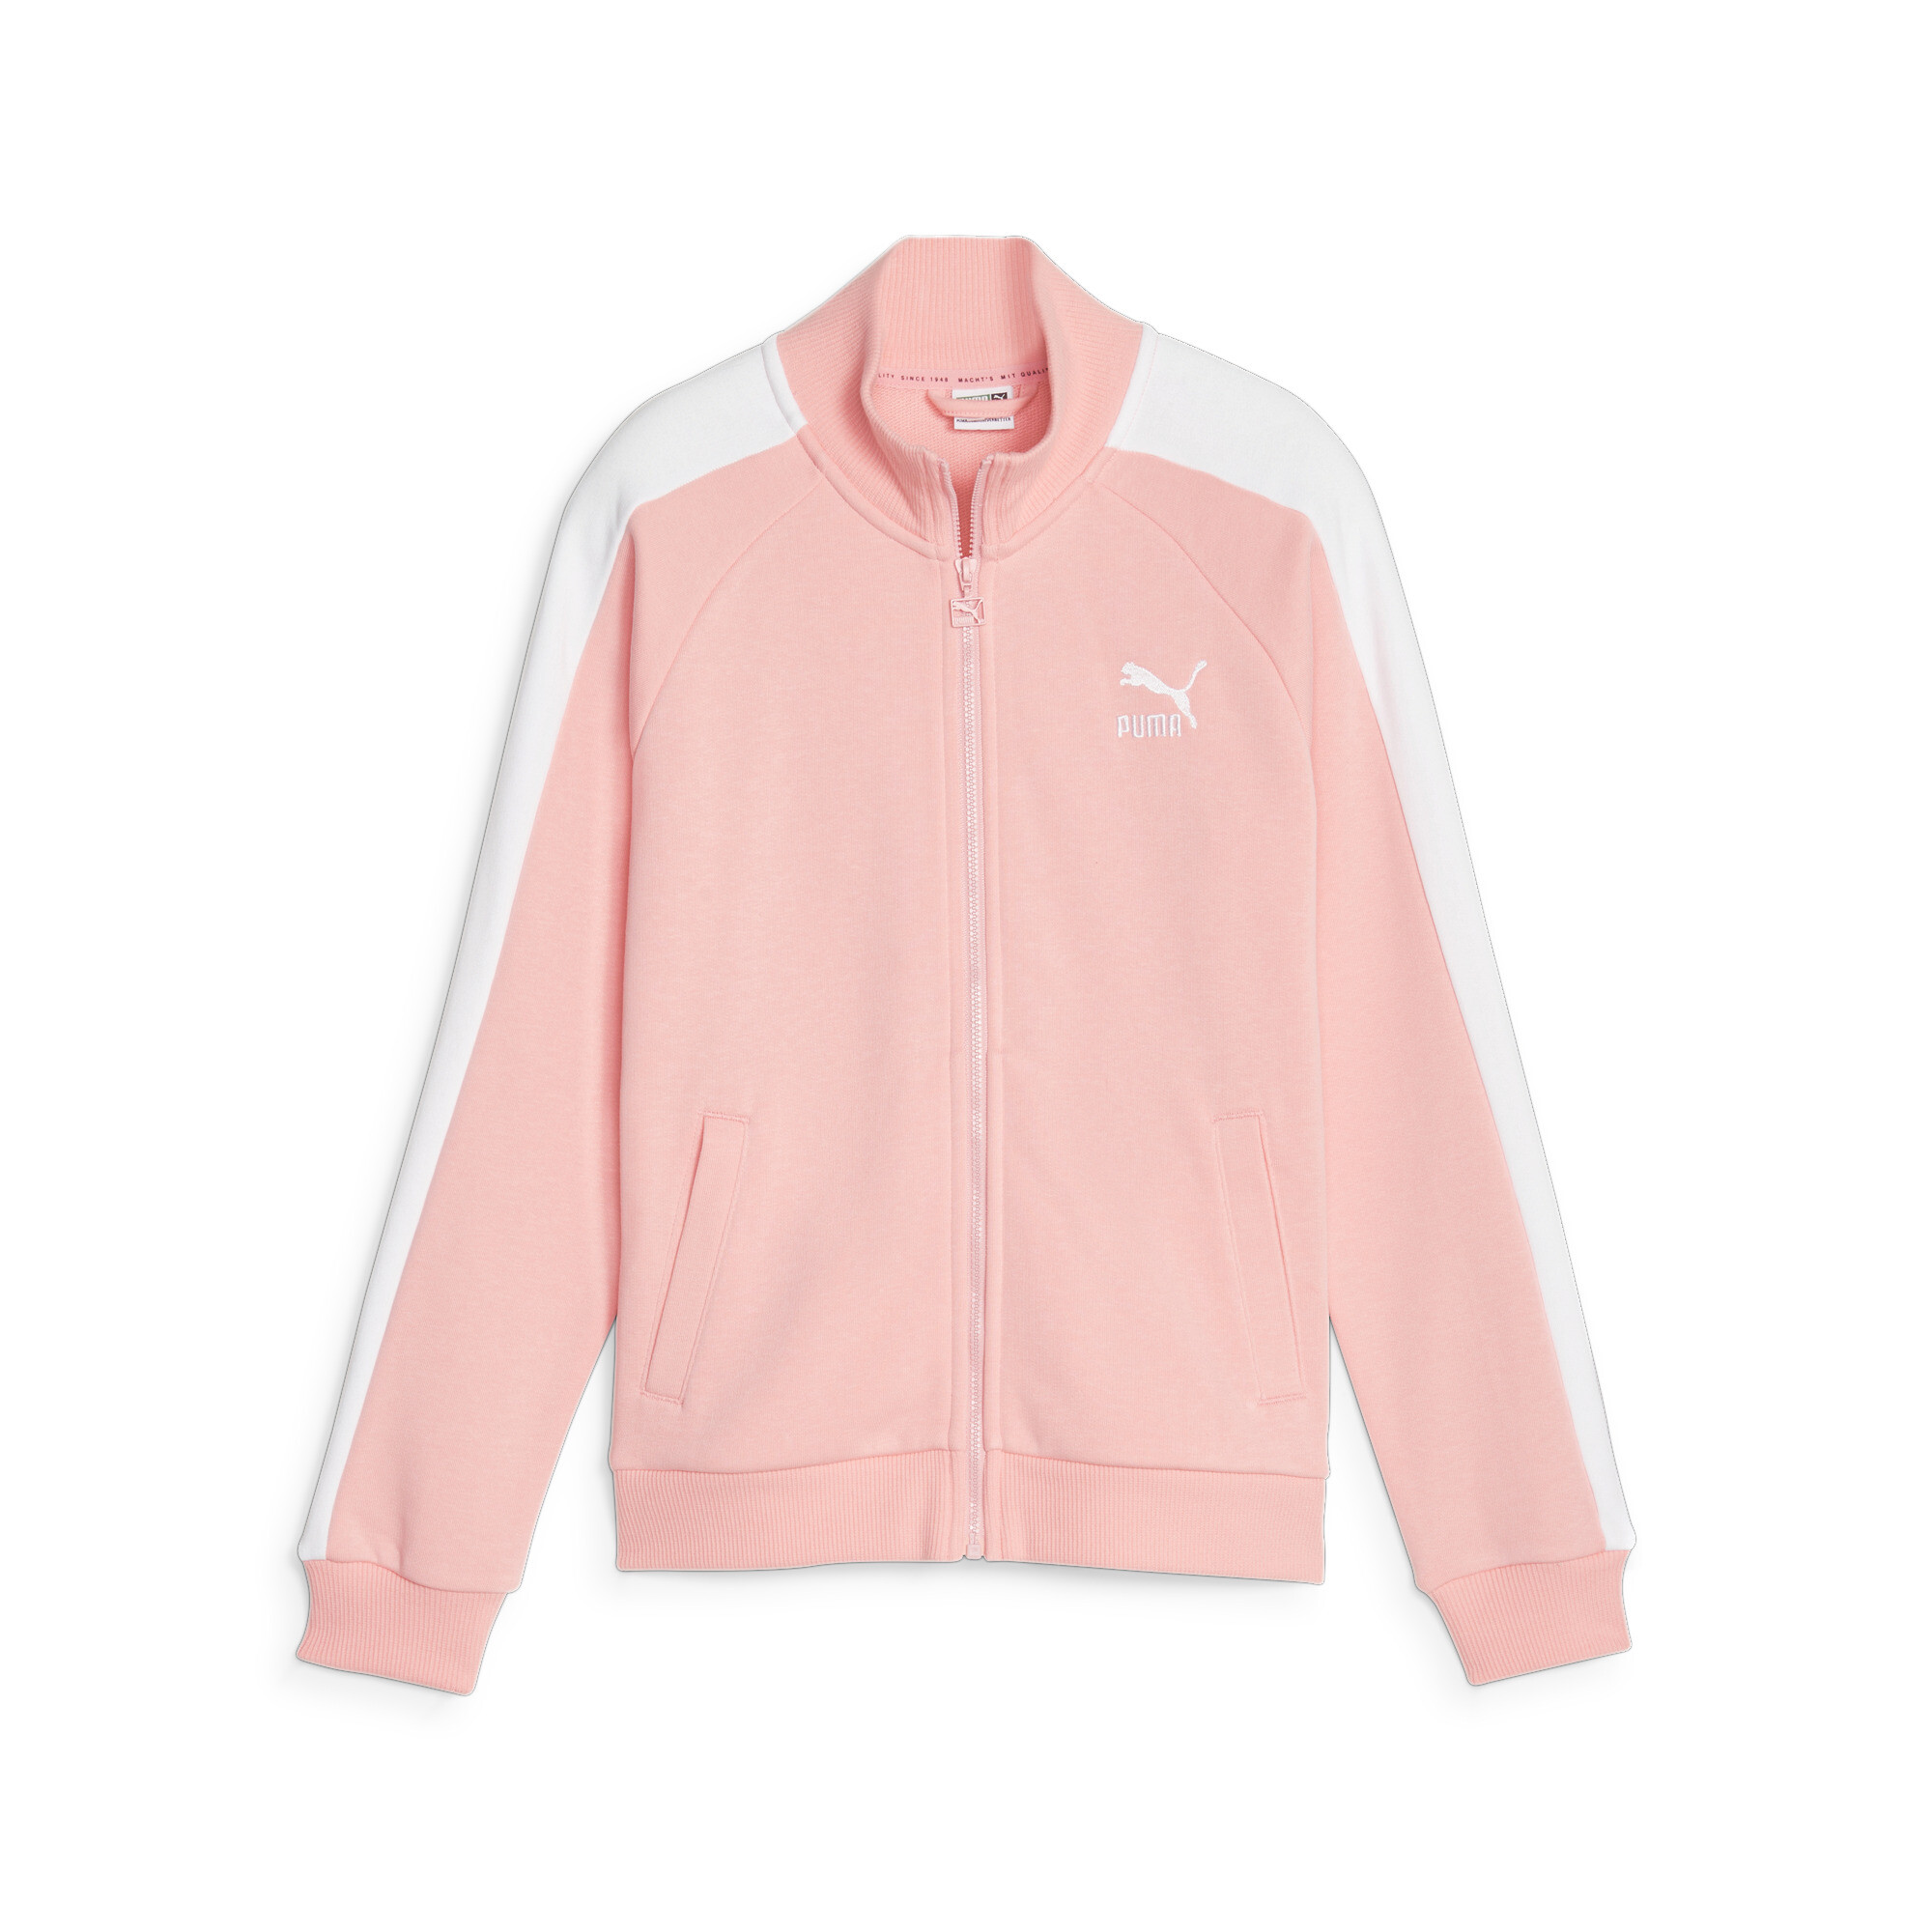 PUMA Classics T7 Track Jacket In Pink, Size 3-4 Youth